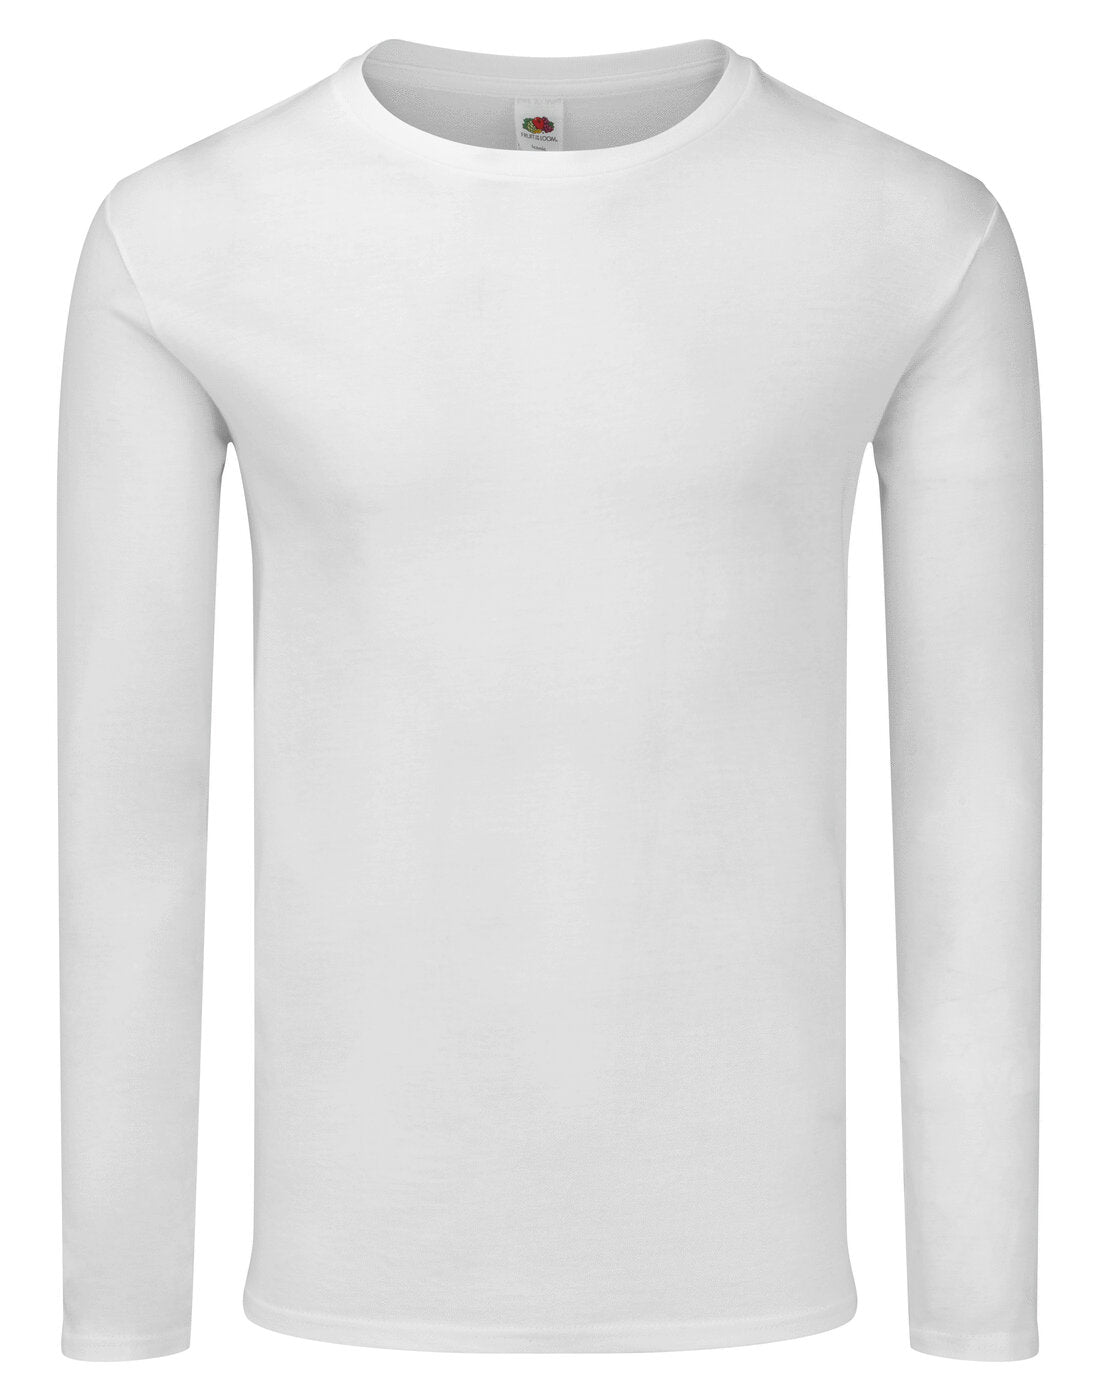 Fruit of the Loom Iconic 150 Classic Long Sleeve T - White